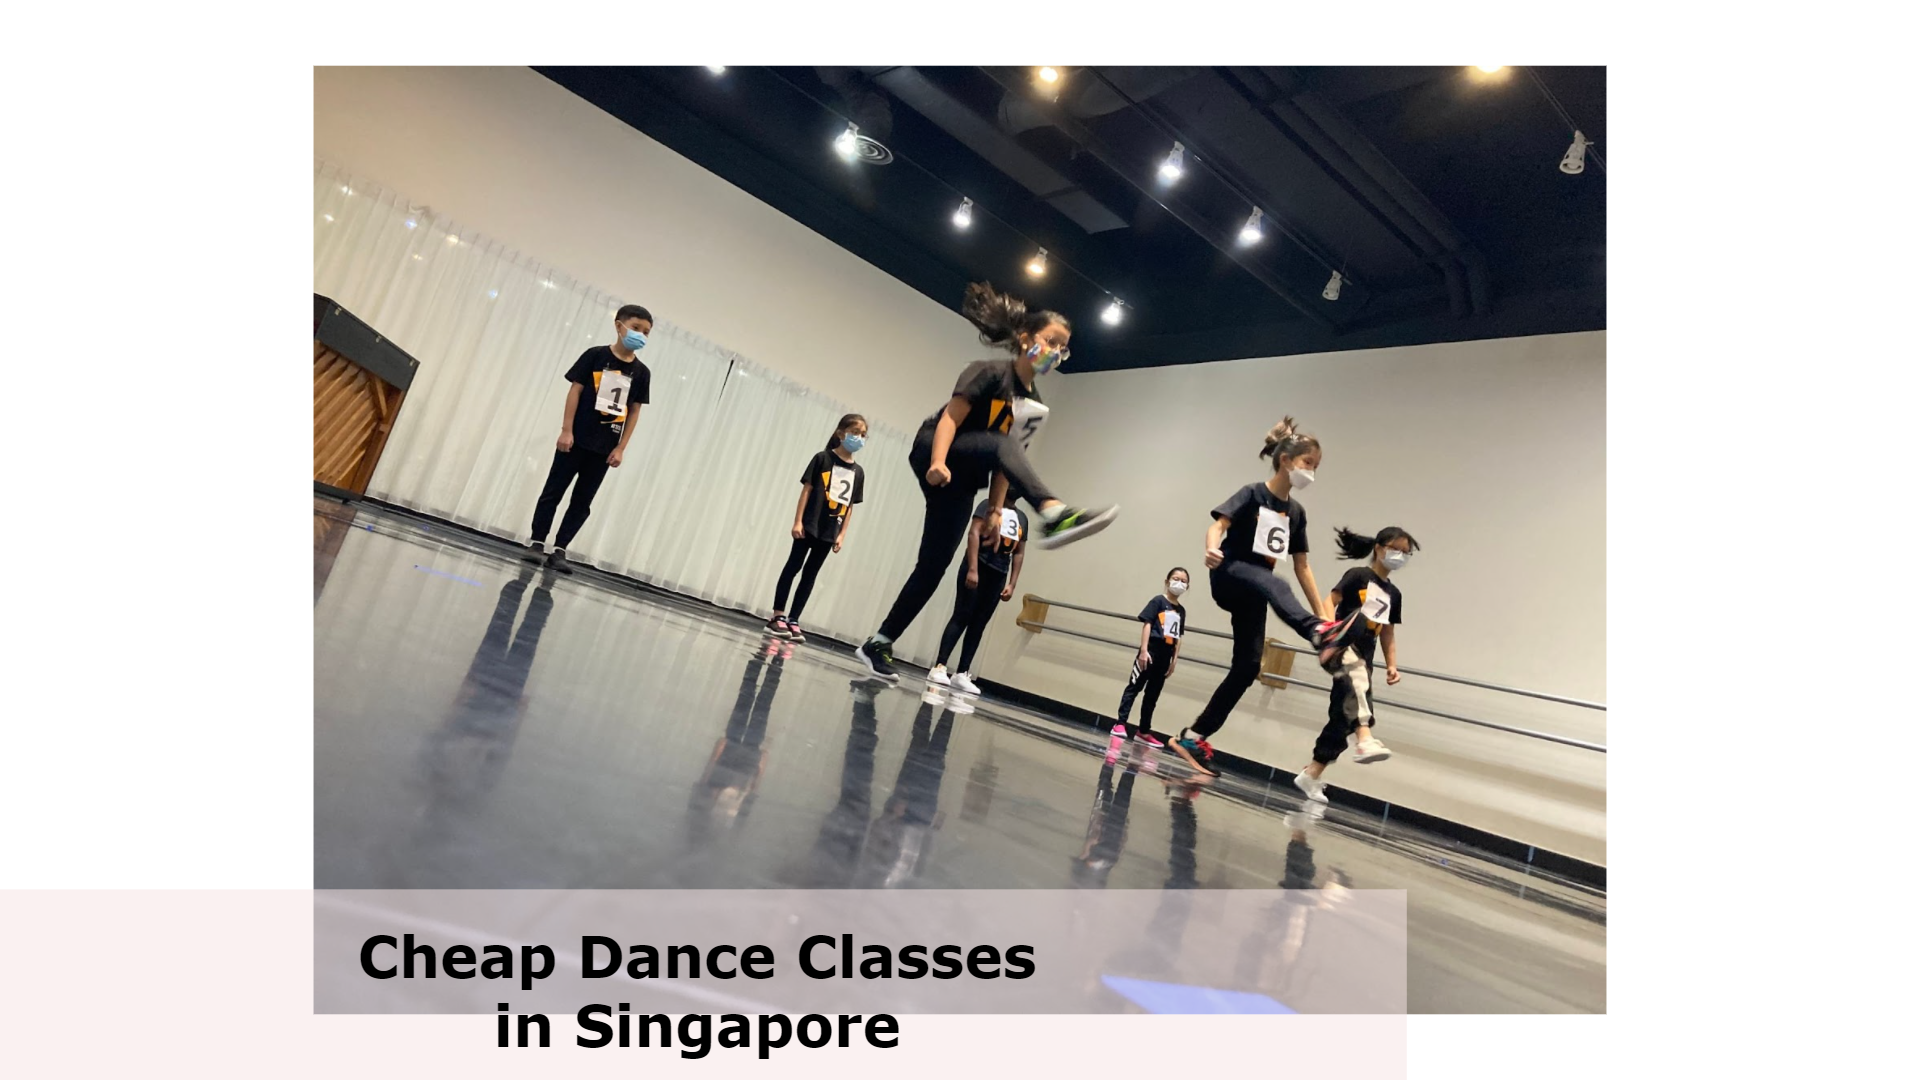 5th Avenue - Cheap Dance Classes in Singapore, Cheap Dance Classes Singapore, How much is a dance class in Singapore?, Where can I practice dance in Singapore?, How can I learn to dance in Singapore?, How do I become a Kpop dance crew member in Singapore?, Hip-hop dance classes for beginners, Dance Studios In Singapore With Dance Classes, beginner dance classes for adults singapore, free dance classes singapore, private dance classes singapore, hip hop dance classes singapore, beginner dance classes singapore, dance class singapore, kpop dance class singapore, latin dance classes singapore, Is 40 too old to learn to dance?, How should a beginner start dancing?, Can I learn dance at 27?, How can I start learning dancing?, Can I learn dance by myself?, 